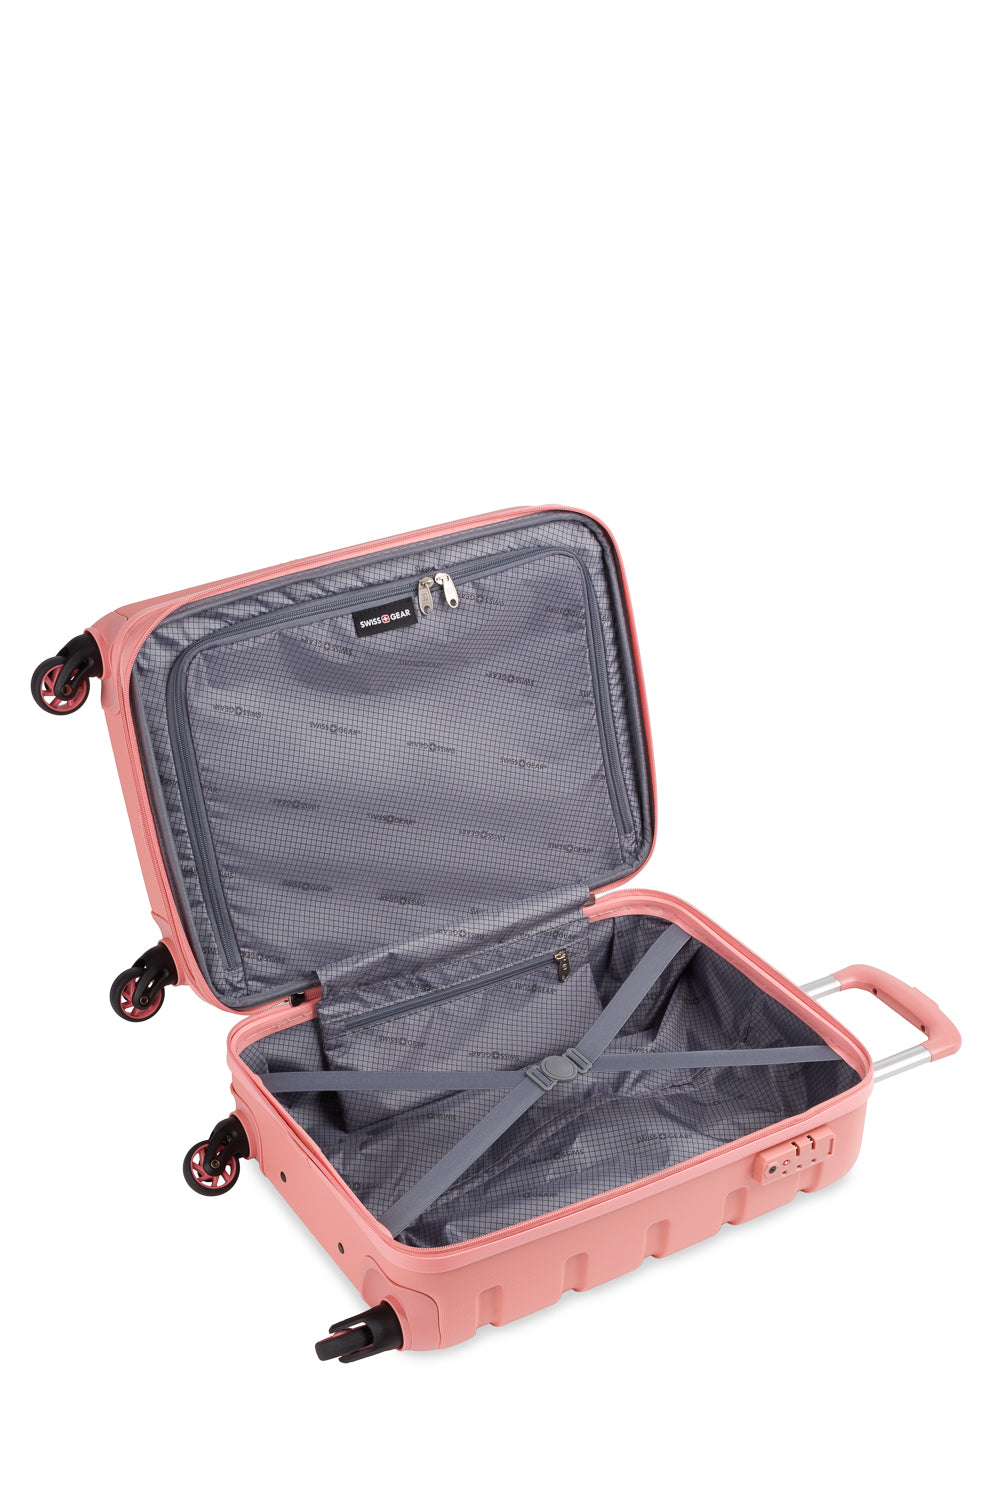 SwissGear 7366 18” Expandable Carry On Hardside Spinner Suitcase